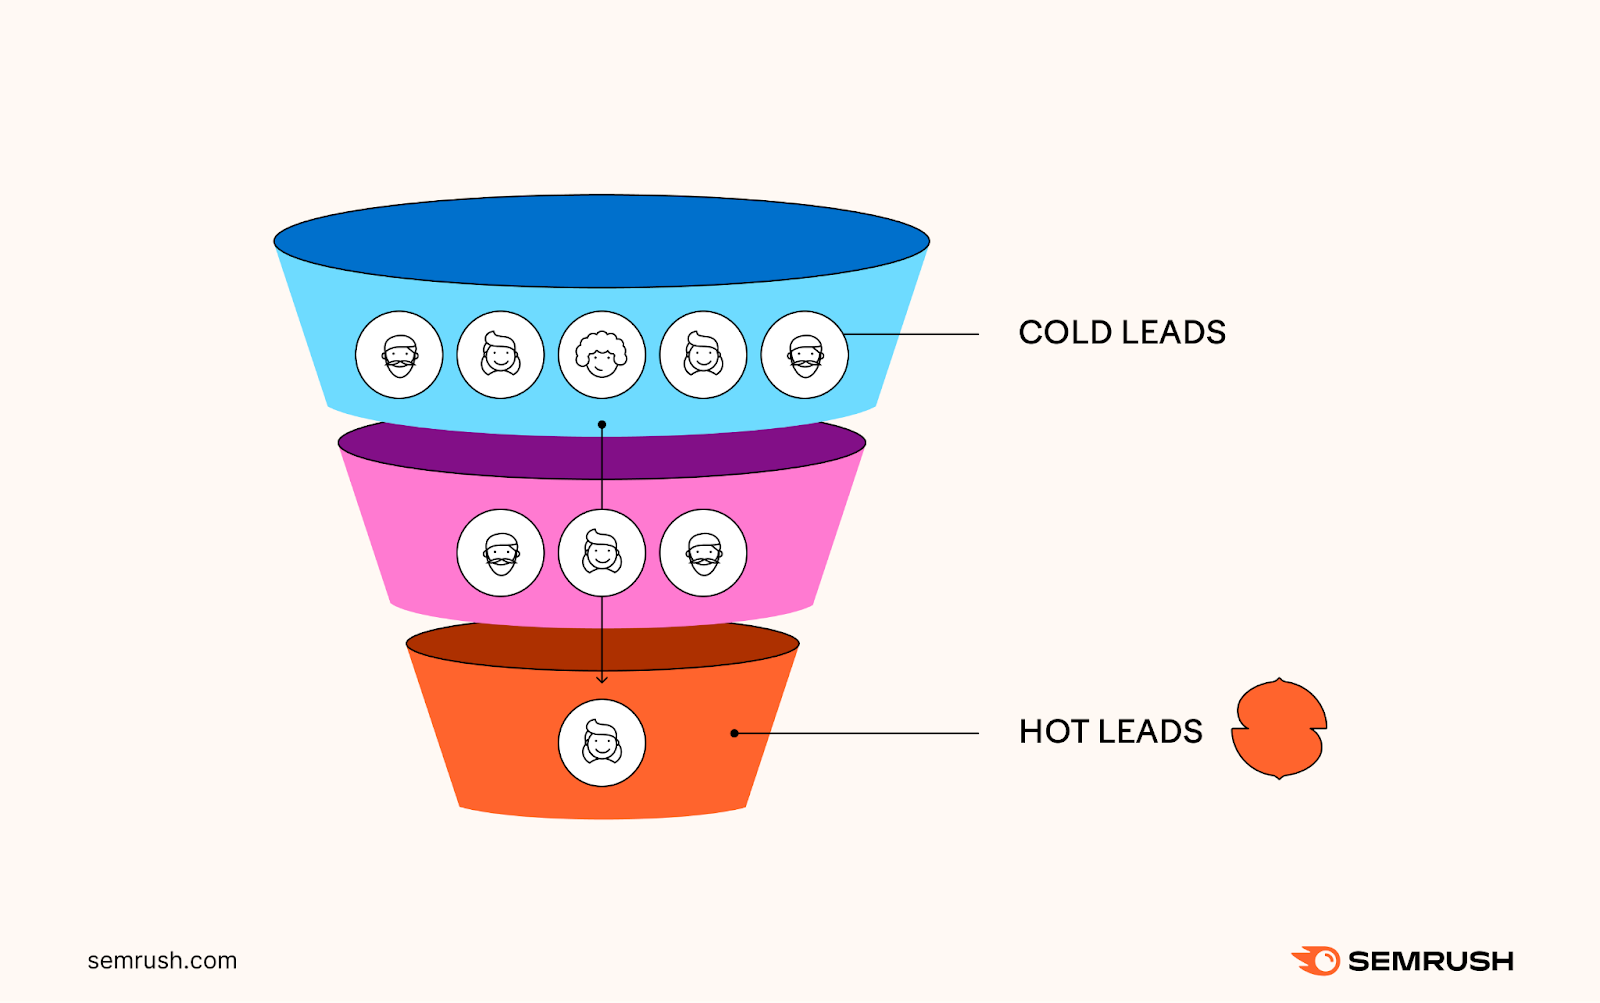 An illustration of a leads funnel showing cold leads at the top, and *** leads at the bottom